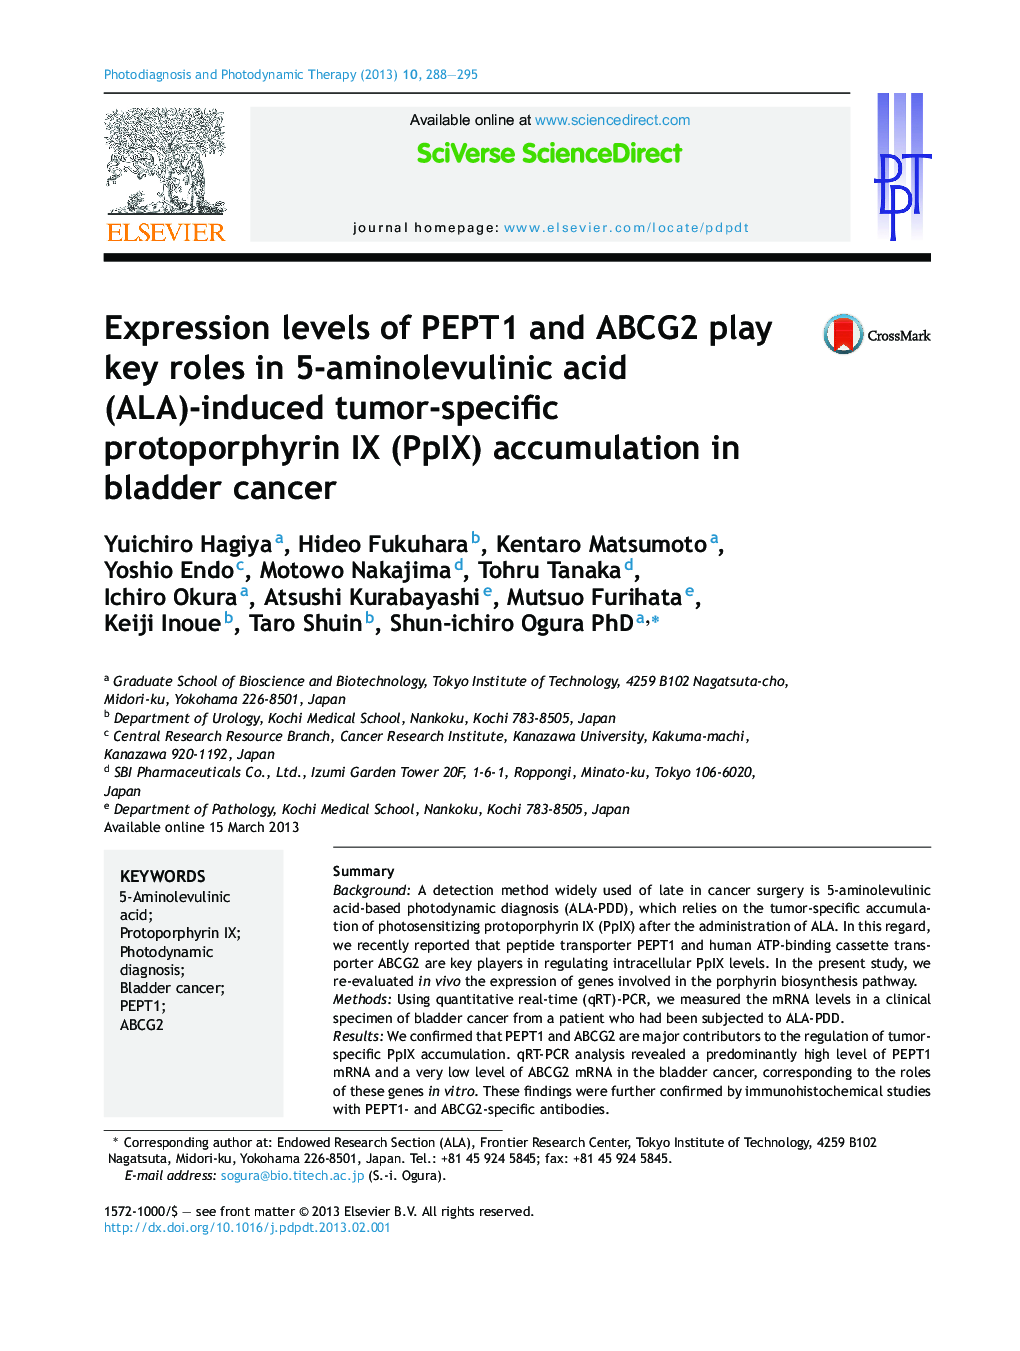 Expression levels of PEPT1 and ABCG2 play key roles in 5-aminolevulinic acid (ALA)-induced tumor-specific protoporphyrin IX (PpIX) accumulation in bladder cancer